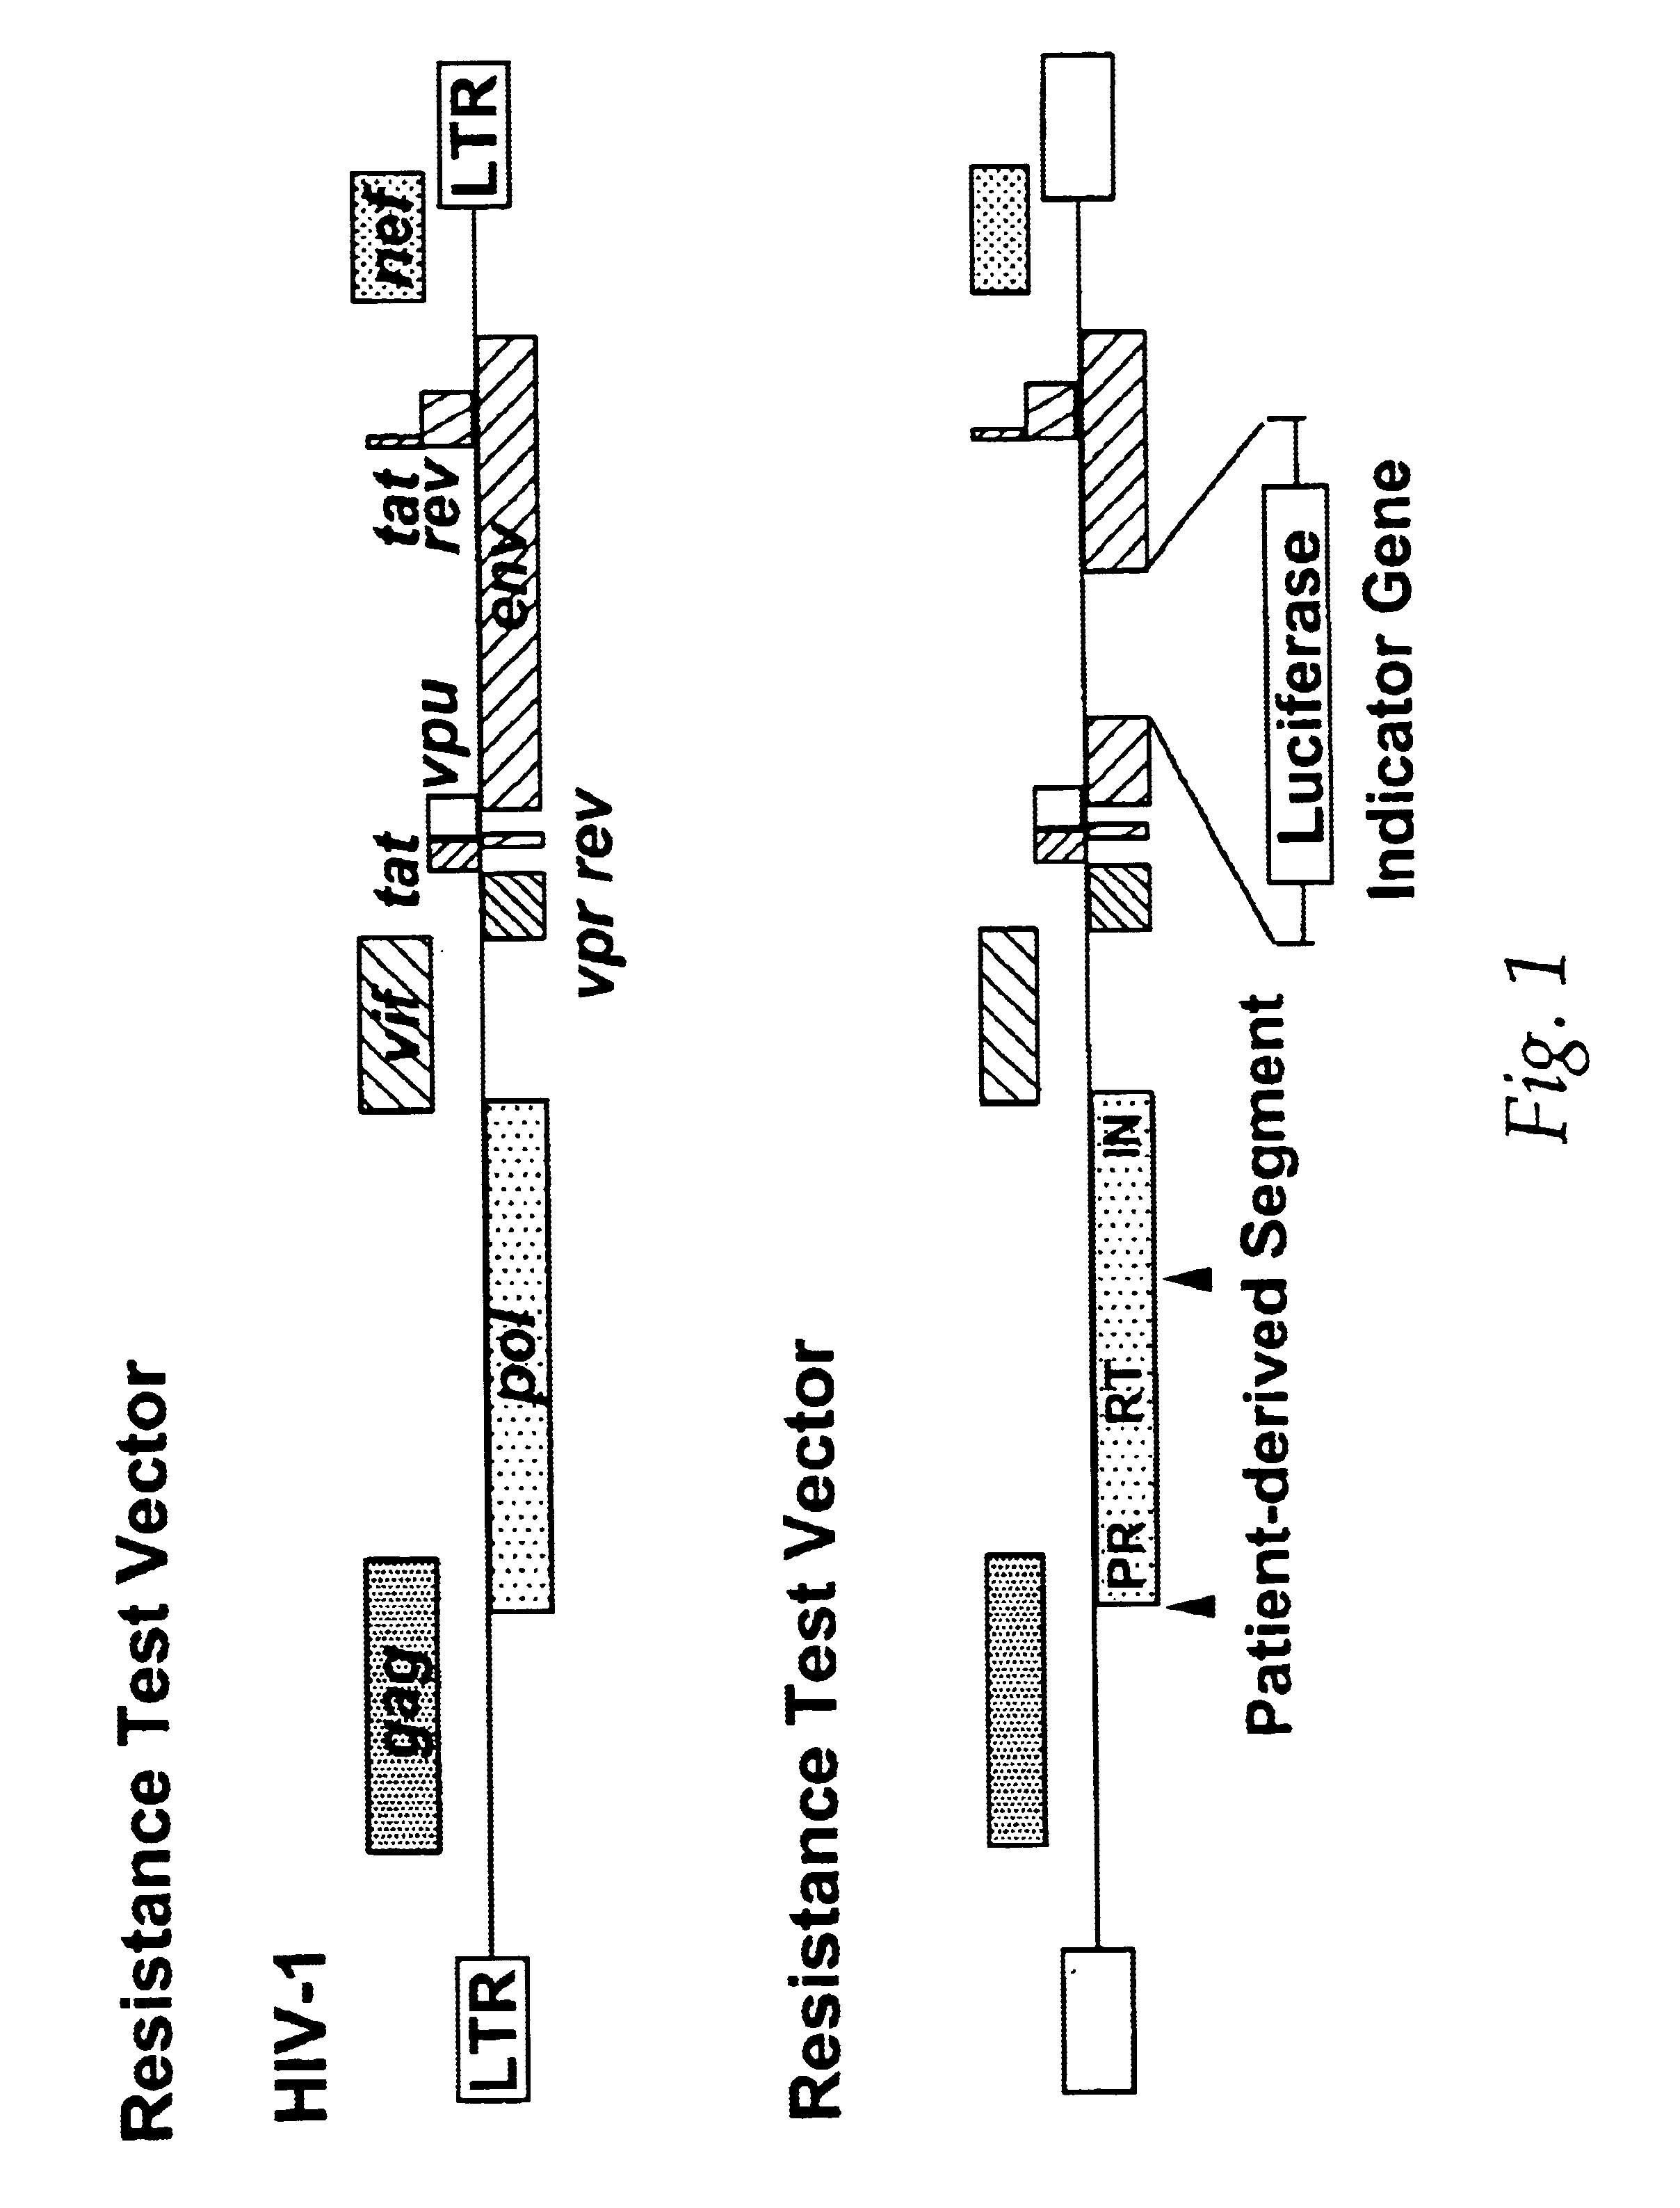 Means and methods for monitoring non-nucleoside reverse transcriptase inhibitor antiretroviral therapy and guiding therapeutic decisions in the treatment of HIV/AIDS